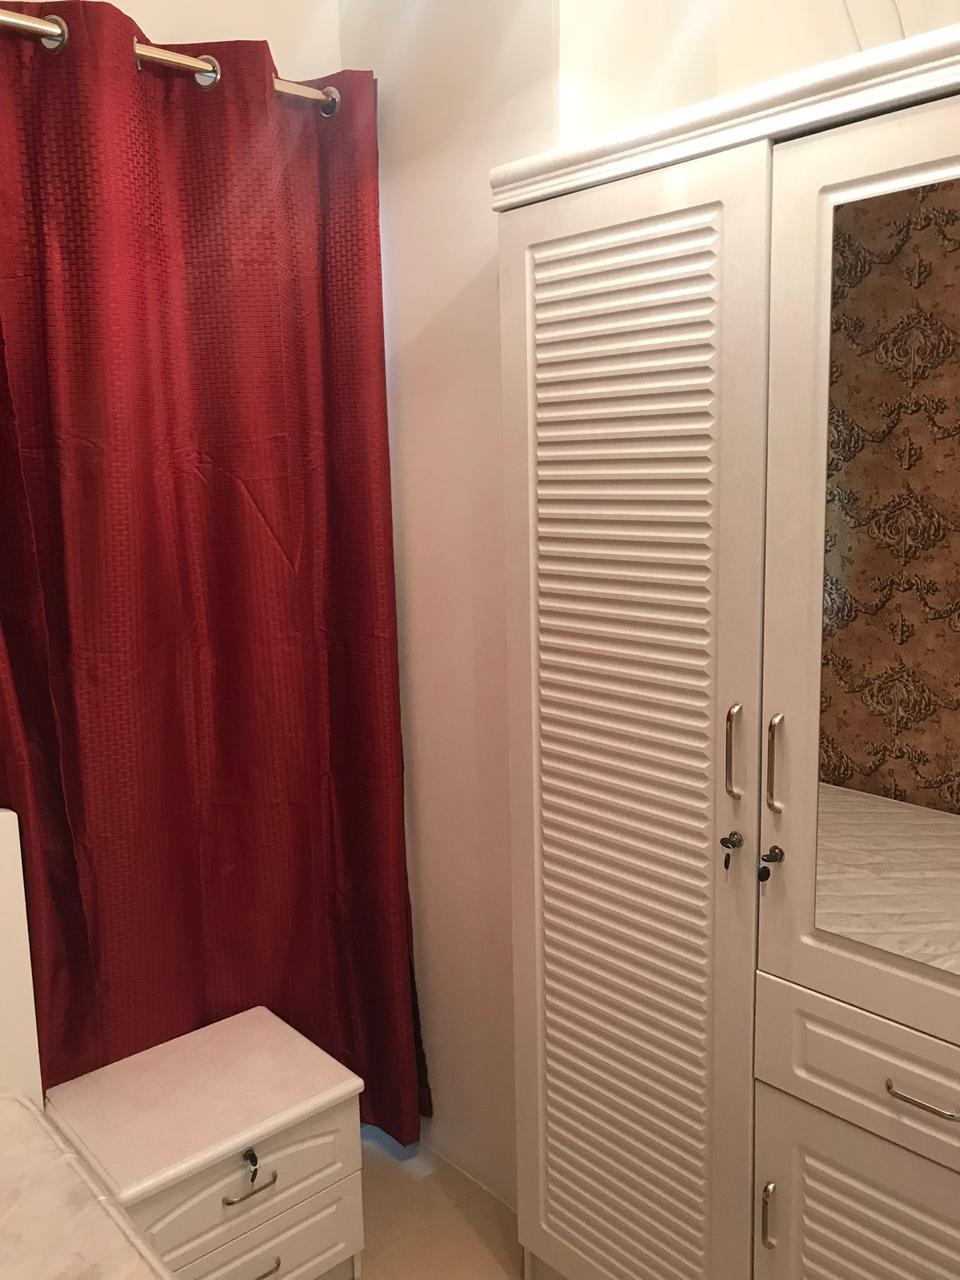 Partition Room With Window And Sharing Bathroom All Inclusive